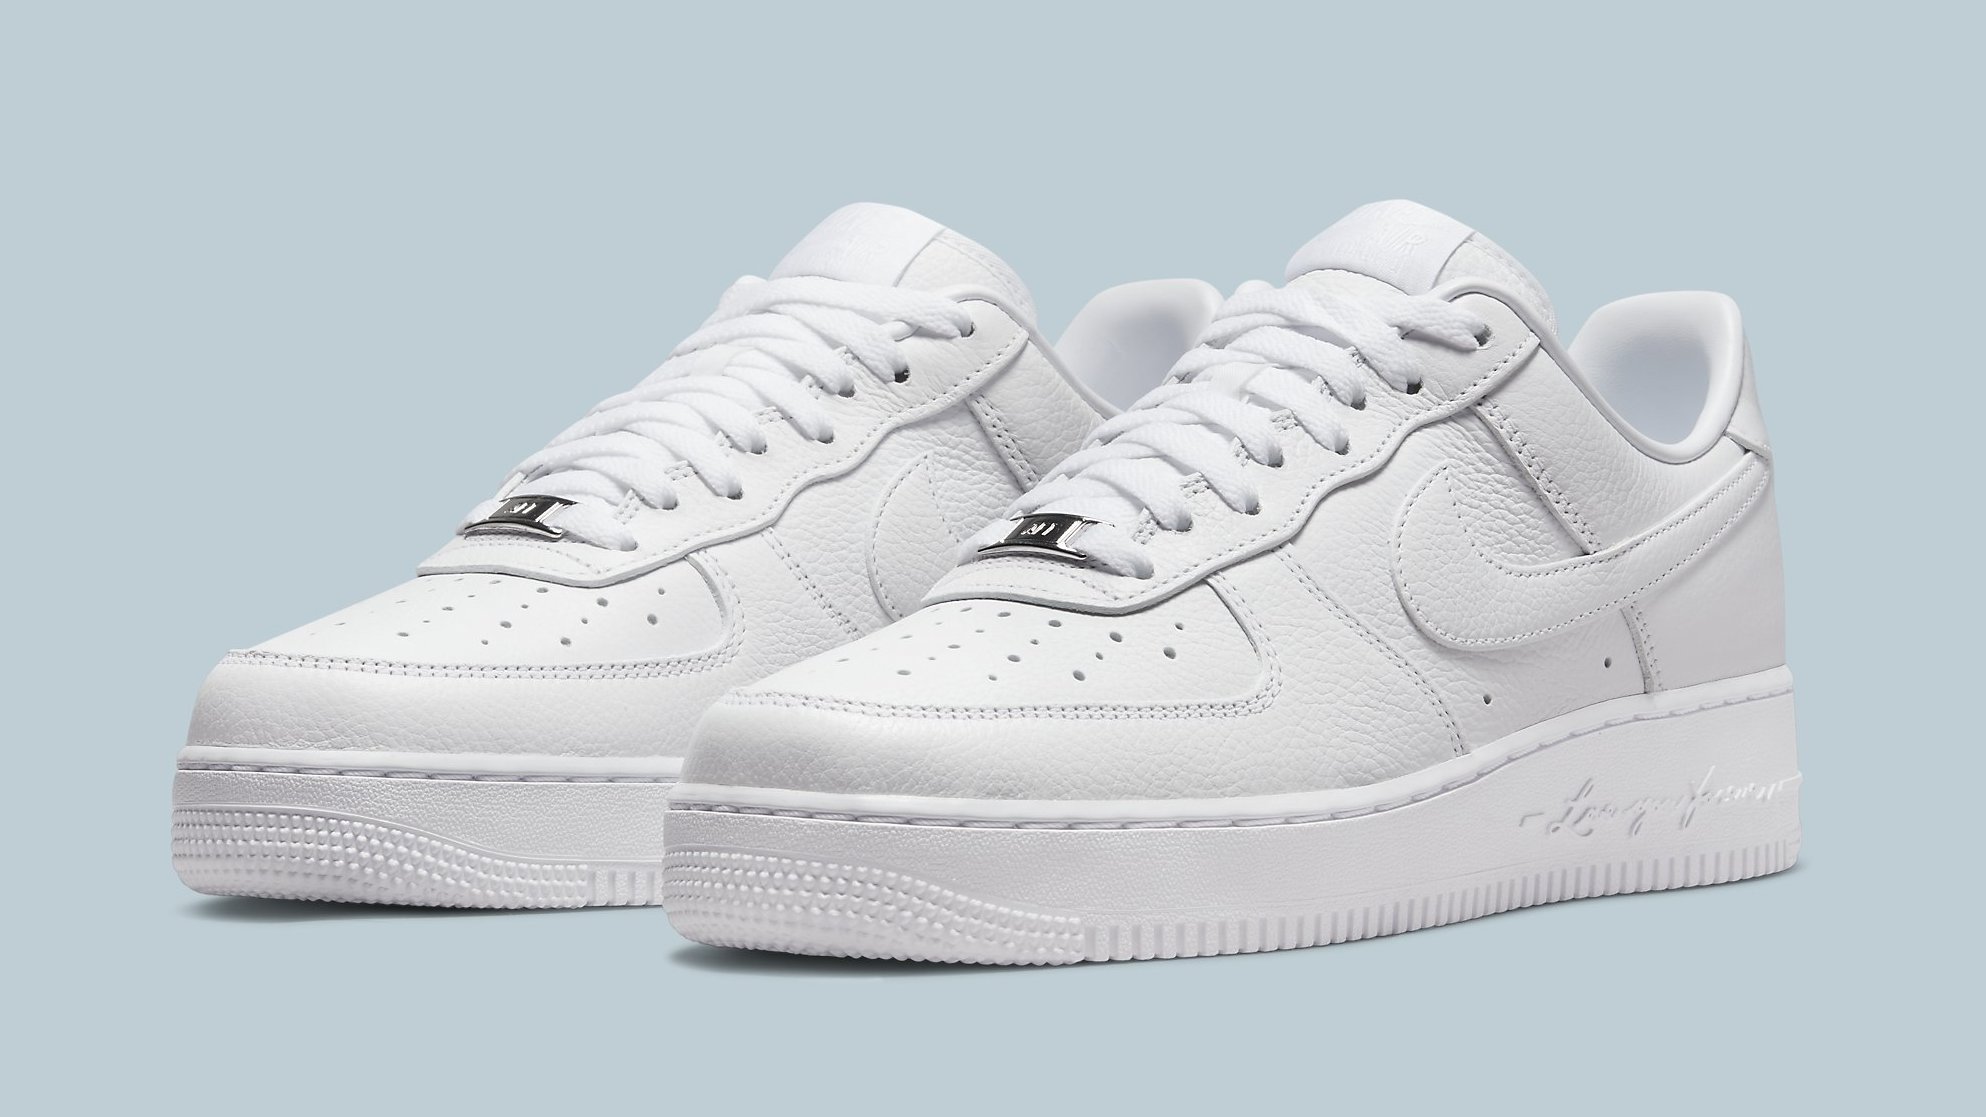 Drake Nocta x Nike Air Force 1 Low 'Certified Lover Boy' Release 